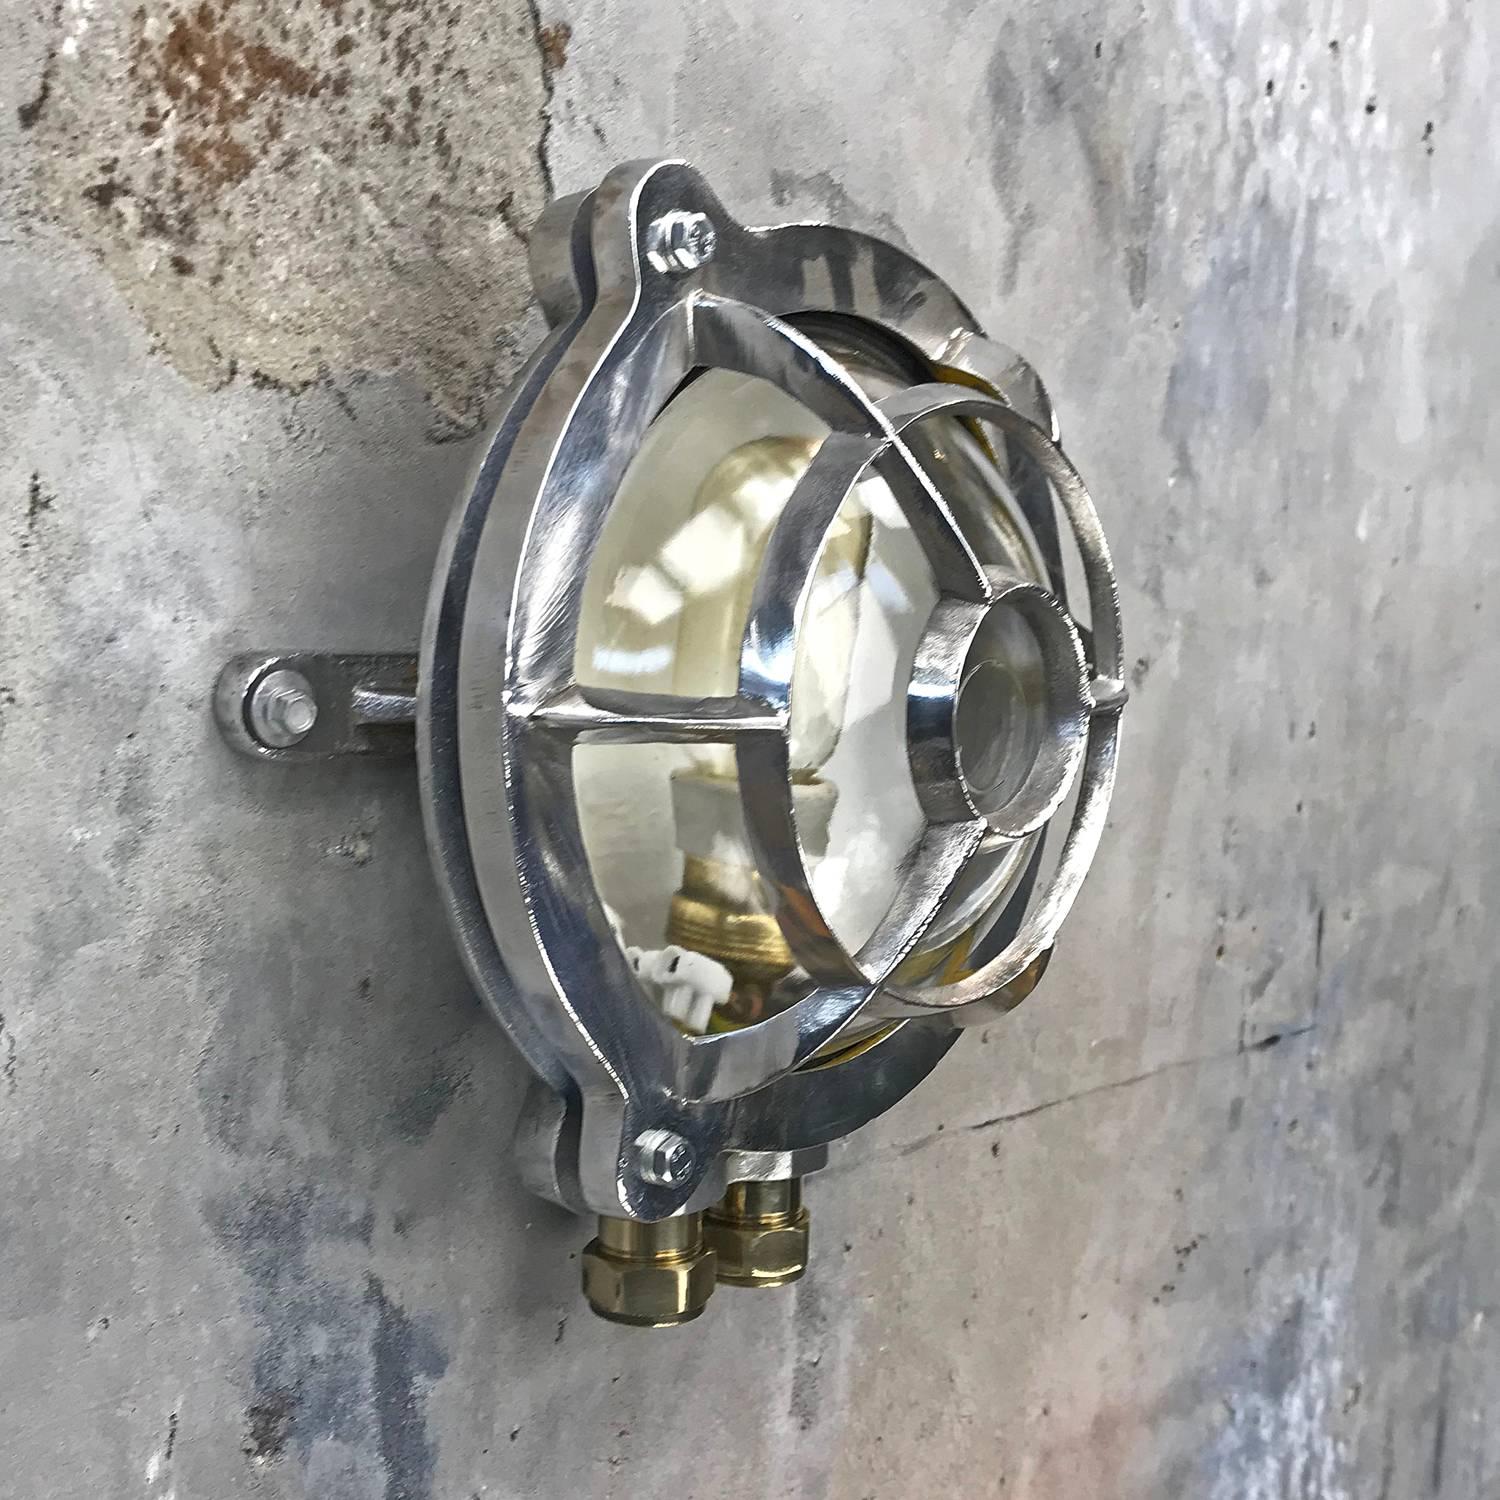 Tempered 1970s Industrial Aluminium Circular Wall Light, Glass Dome and Edison Bulb